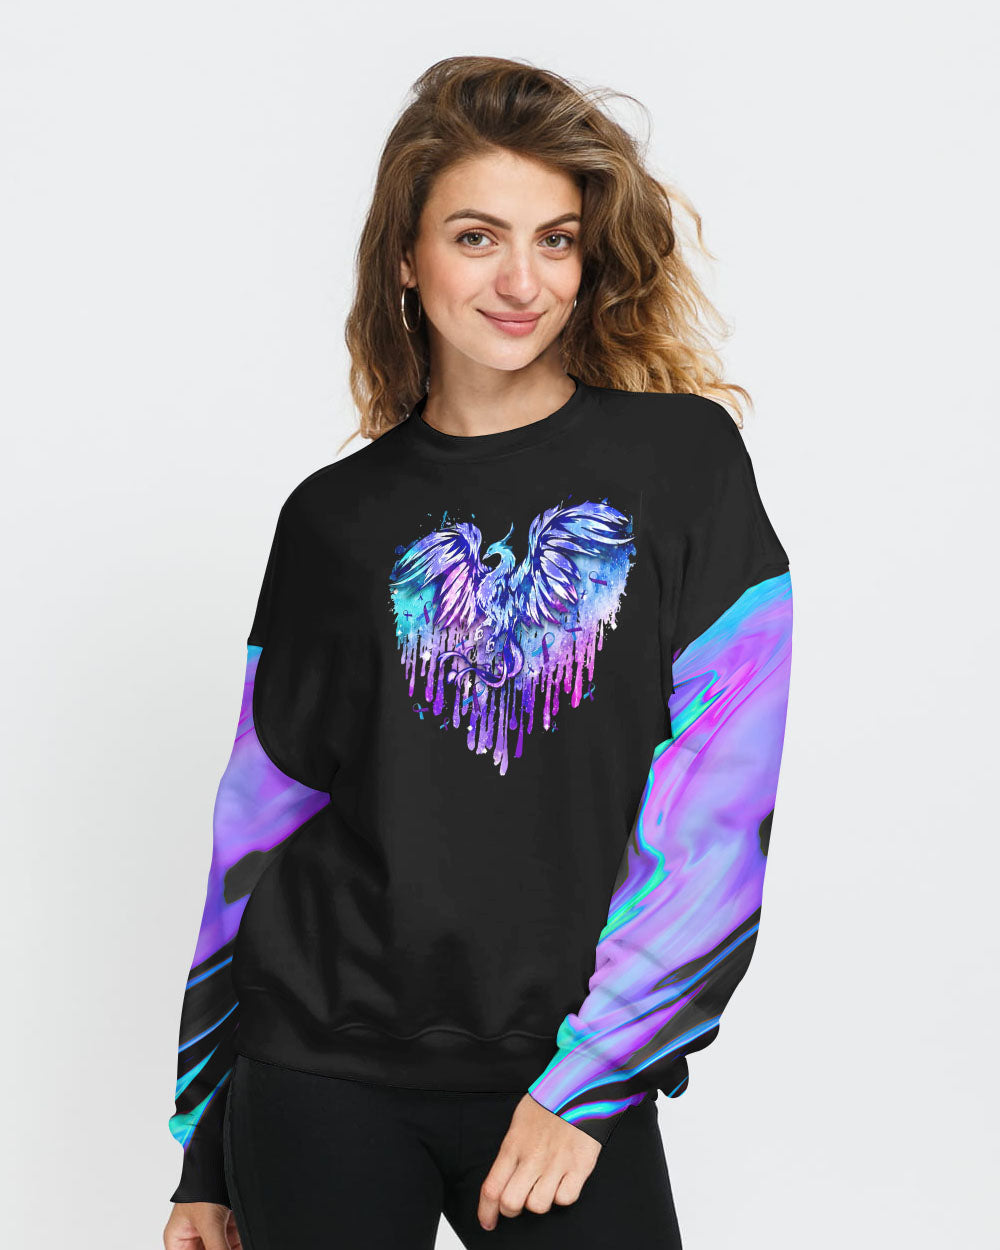 Rise From The Ashes Phoenix Women's Suicide Prevention Awareness Sweatshirt